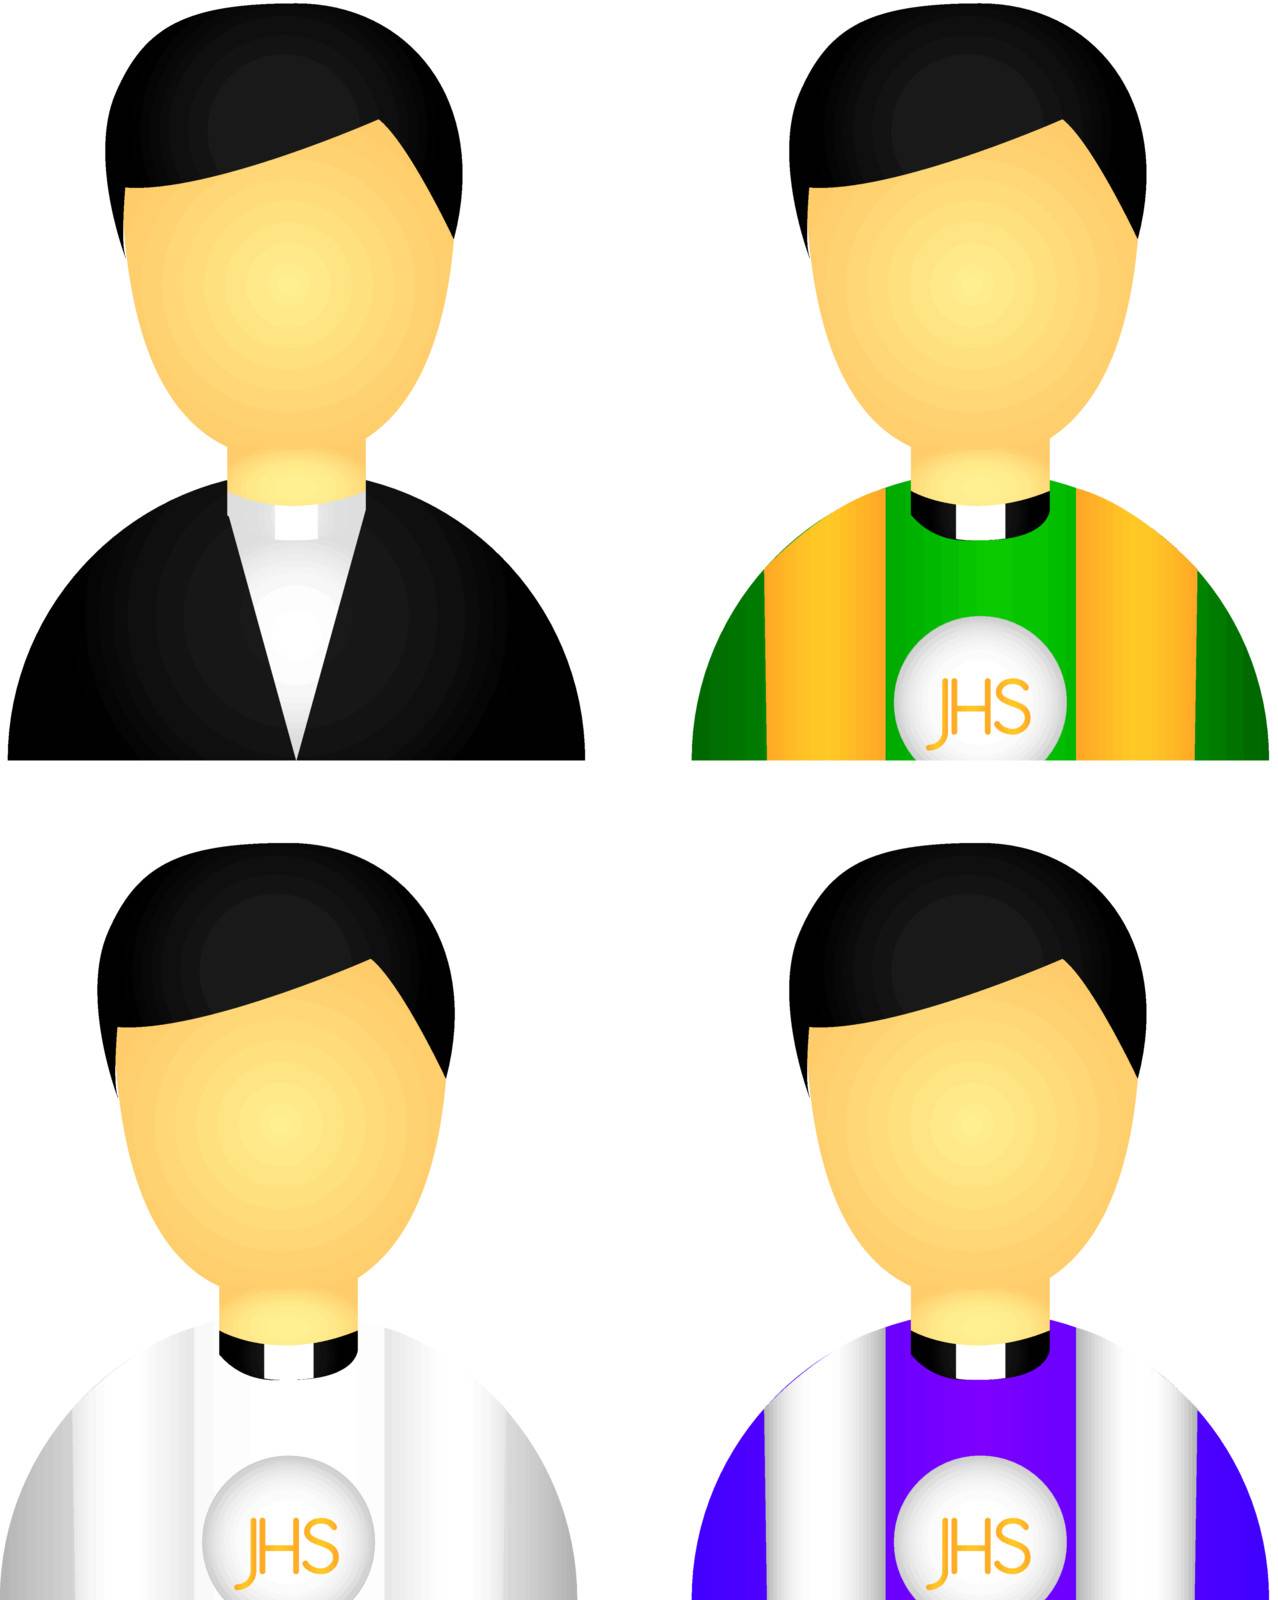 priest icons isolated over white background. vector